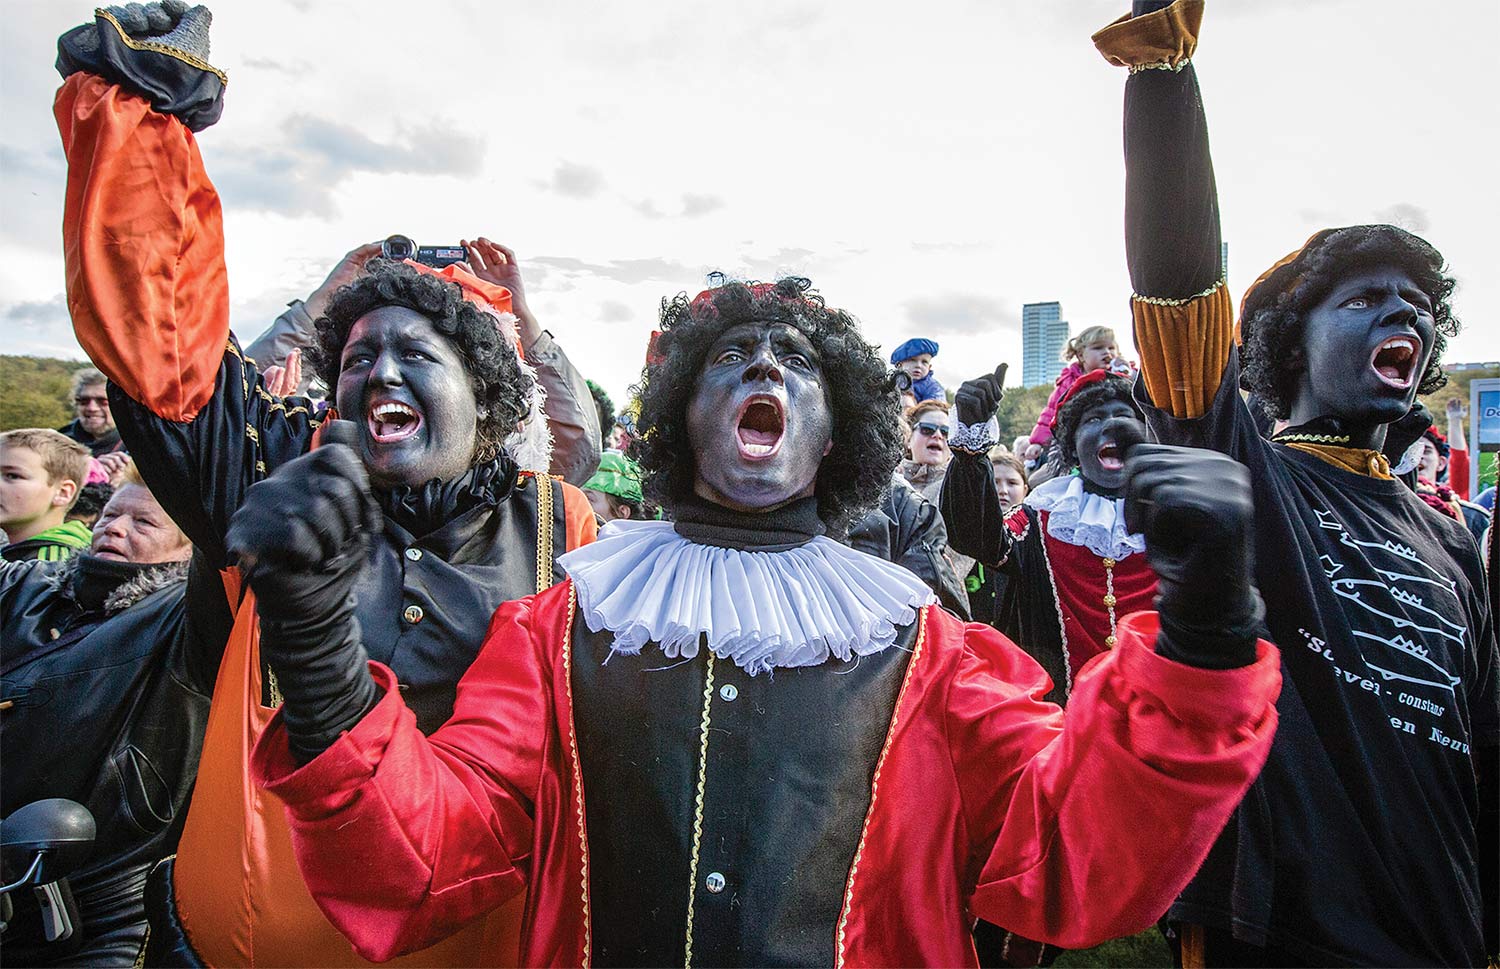 On October 26, 2013, several hundred people demonstrated at the Malieveld in The Hague to keep Zwarte Piet as part of the traditional Dutch Sinterklaas  celebration. The demonstration was an outgrowth  of a Facebook page dedicated to saving Zwarte Piet. (Bart Maat / Hollandse Hoogte / Redux)